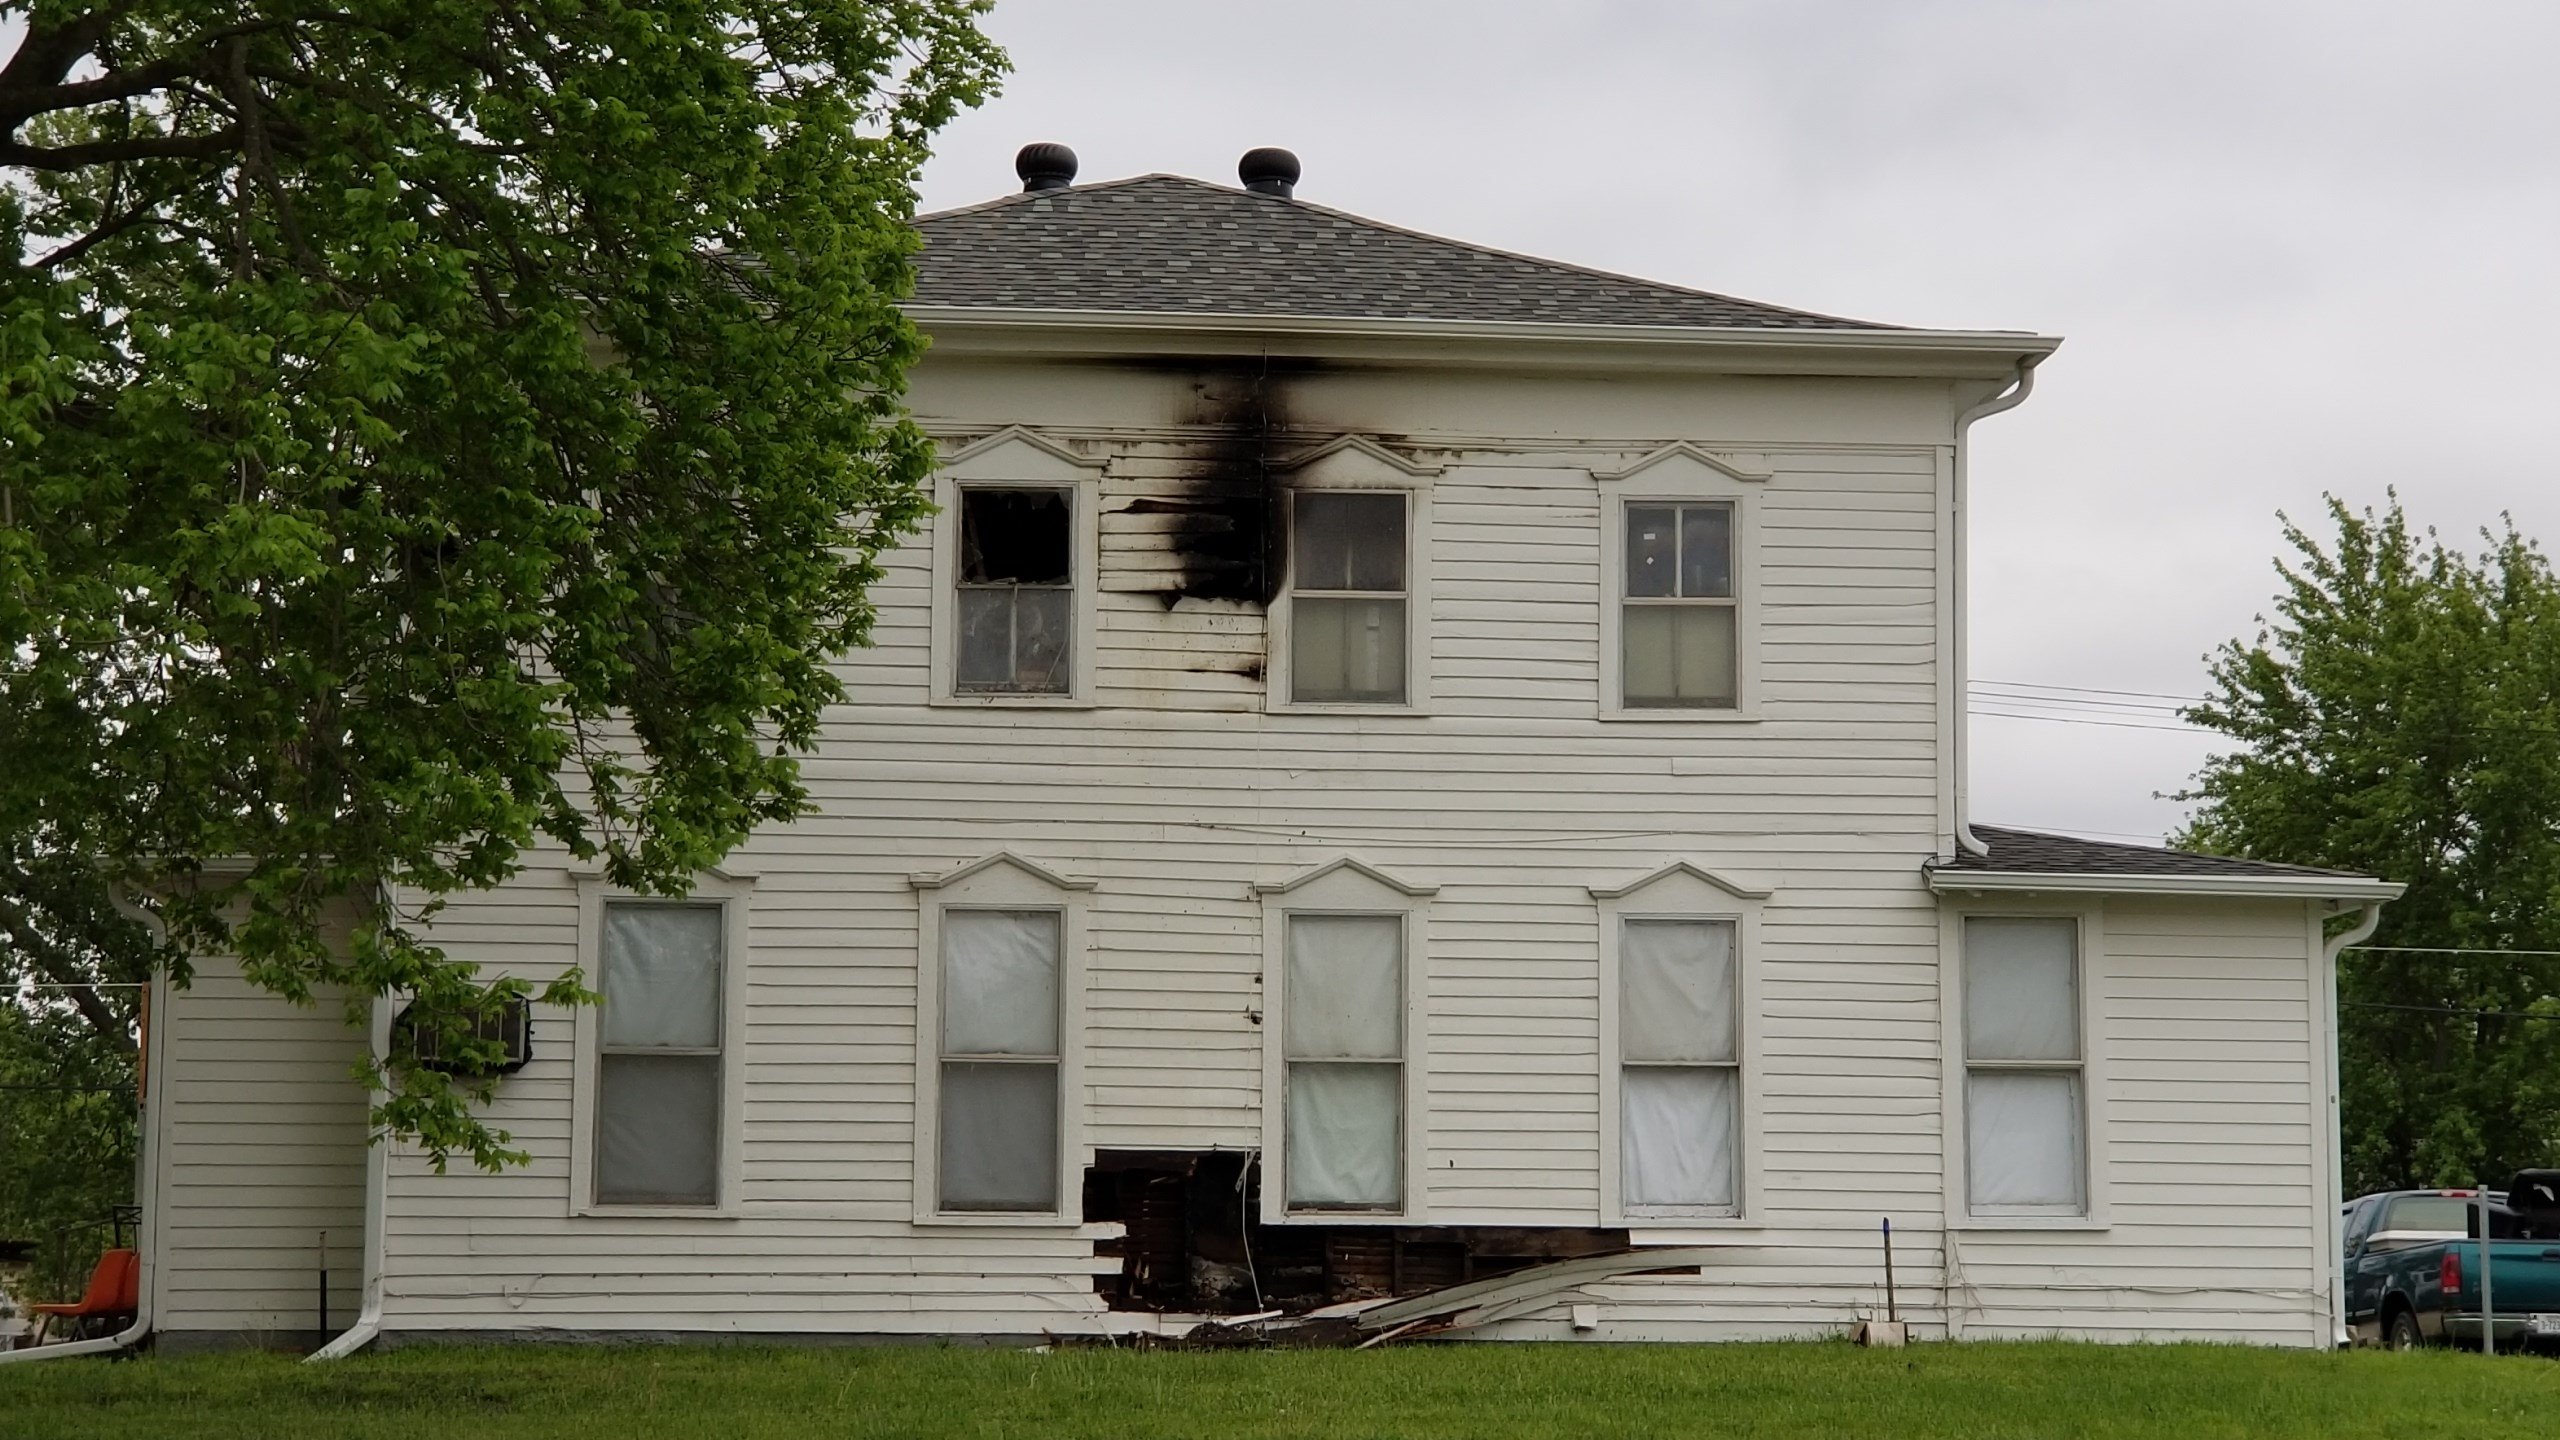 Fire Breaks Out in East Beatrice Apartment Building - SOUTHEAST - NEWS ...